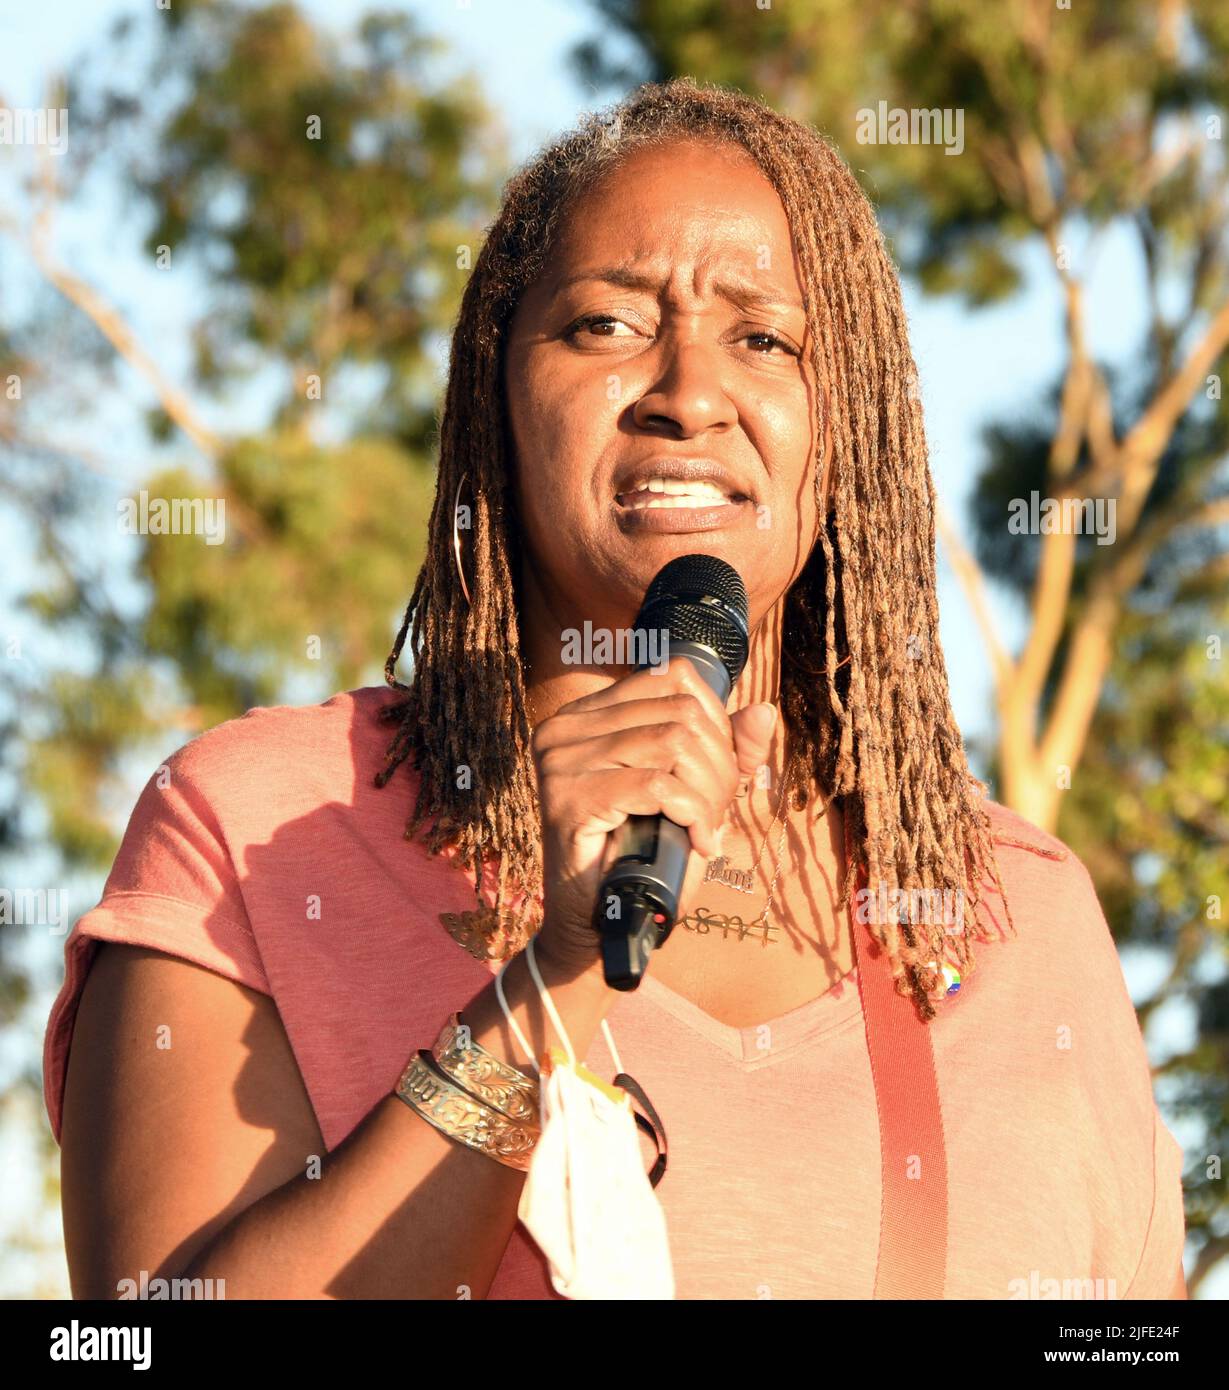 Los Angeles, USA. 01st July, 2022. LA Supervisor Holly Mitchell attends the 2022 South LA Pride Community Picnic at the Norman O. Houston Park in Los Angeles, USAlifornia on July 1, 2022 Credit: Koi Sojer/Snap'n U Photos/Media Punch/Alamy Live News Stock Photo